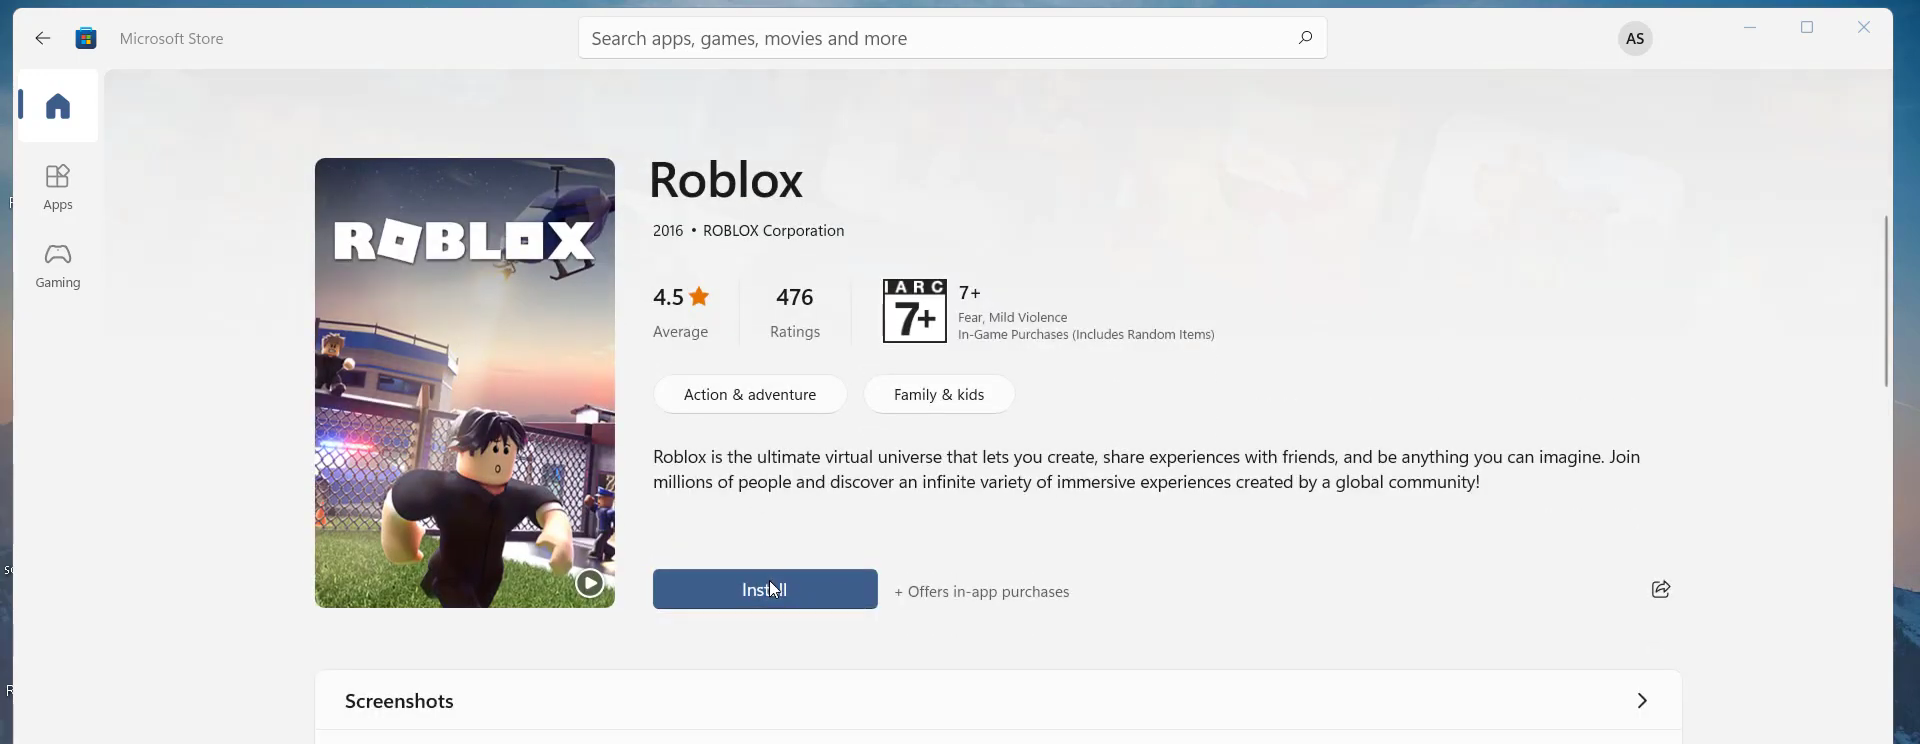 You need to search Roblox and install it.